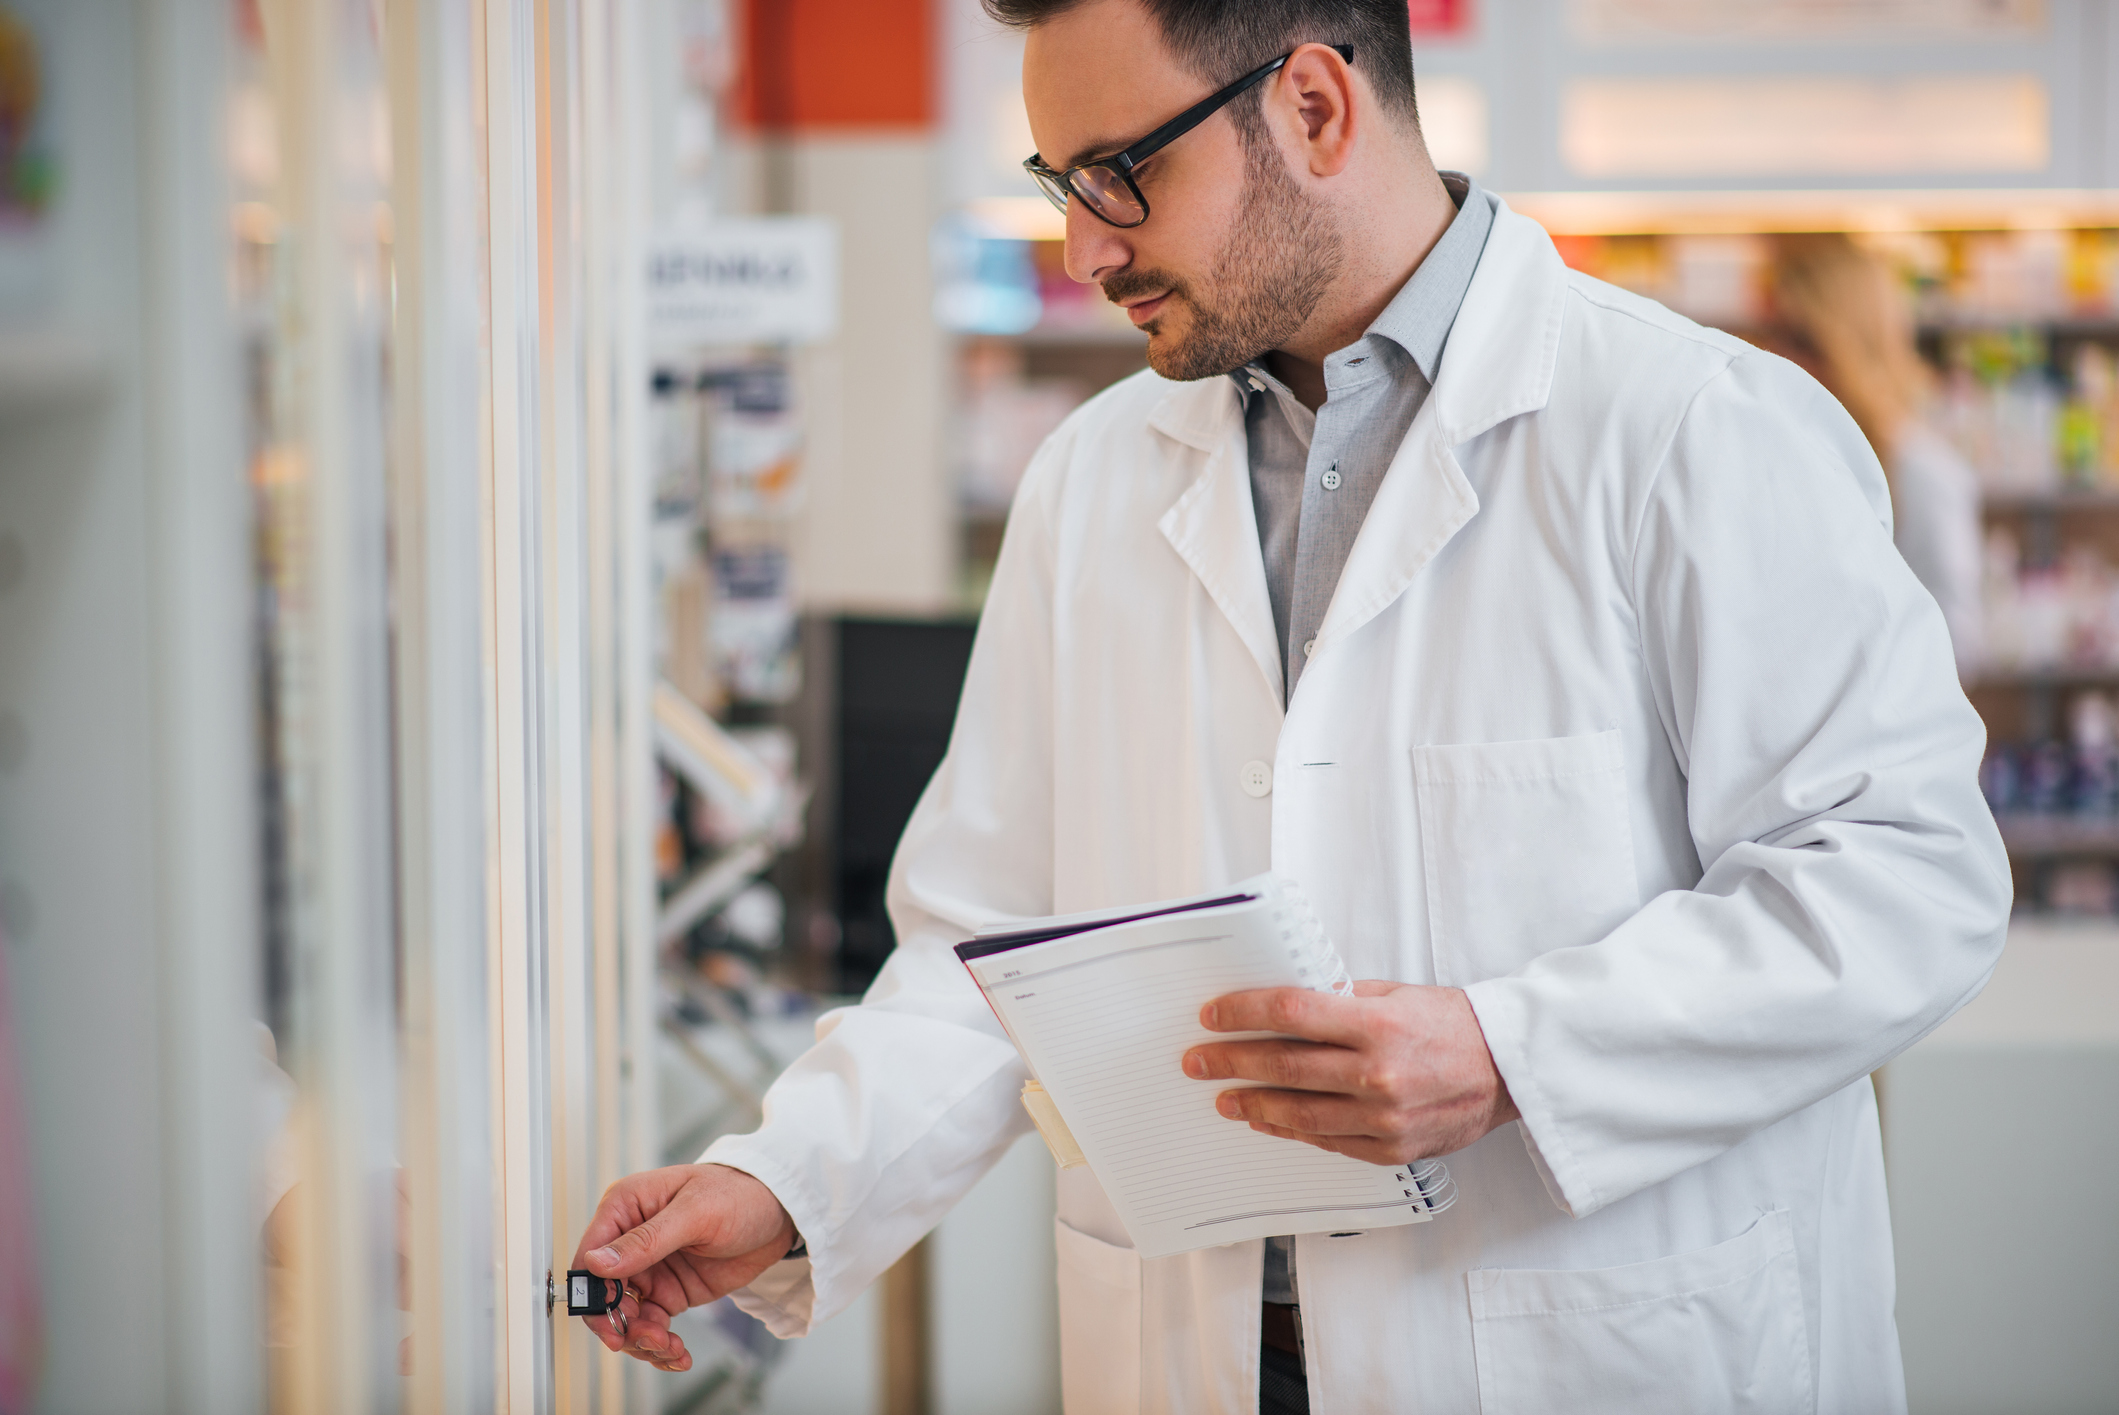 male Pharmacist monitoring controlled substances and high-value medications